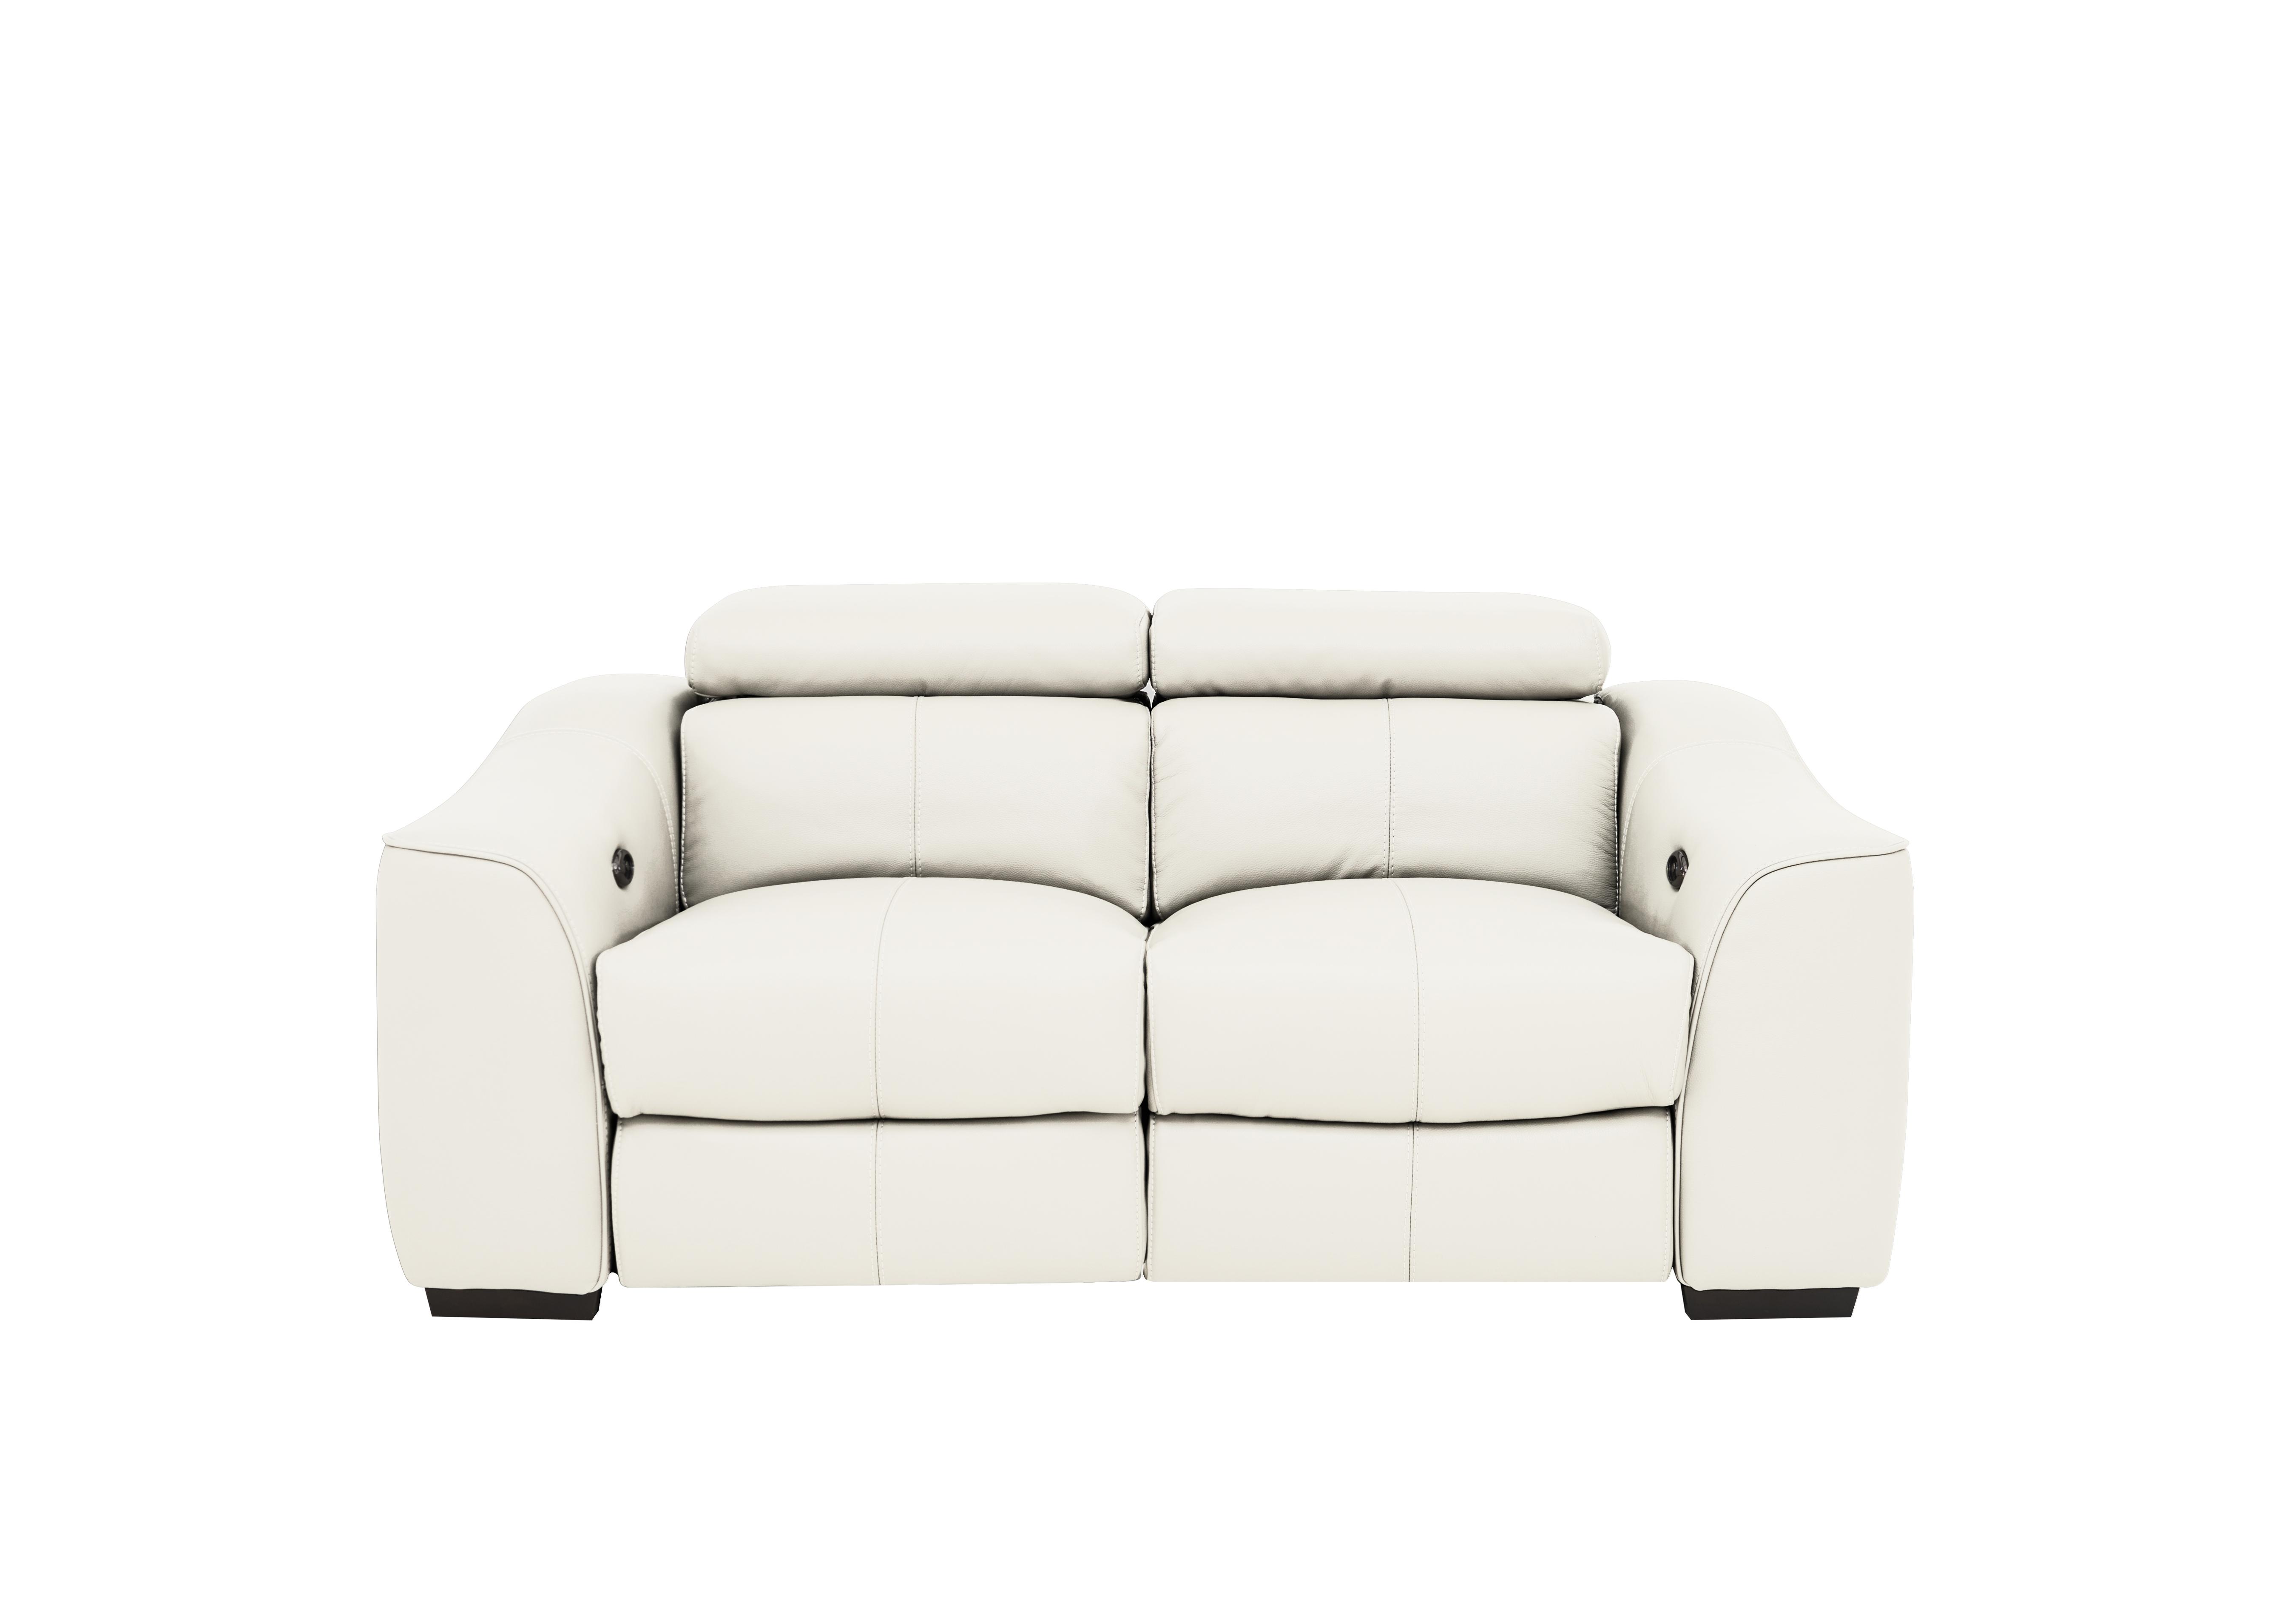 Elixir 2 Seater Leather Sofa in Bv-744d Star White on Furniture Village